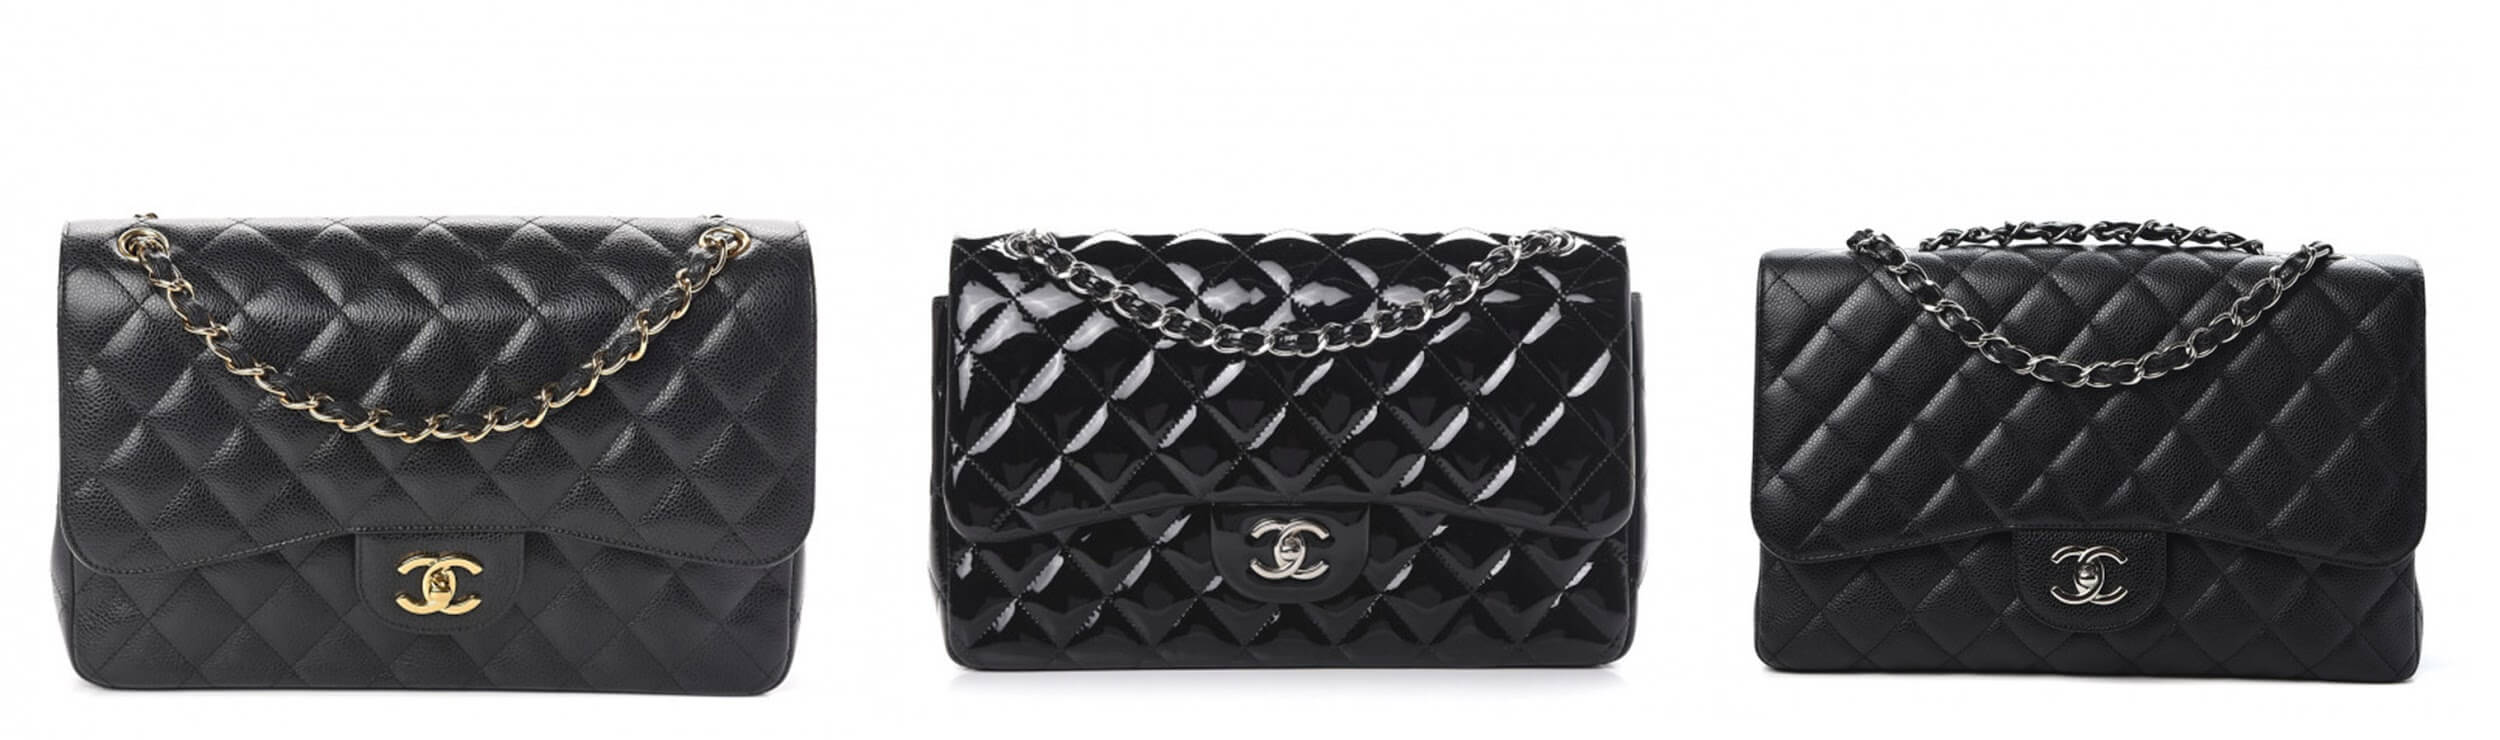 The Bags and Accessories of Chanel ParisBombay Metiers dArt 2012   PurseBlog